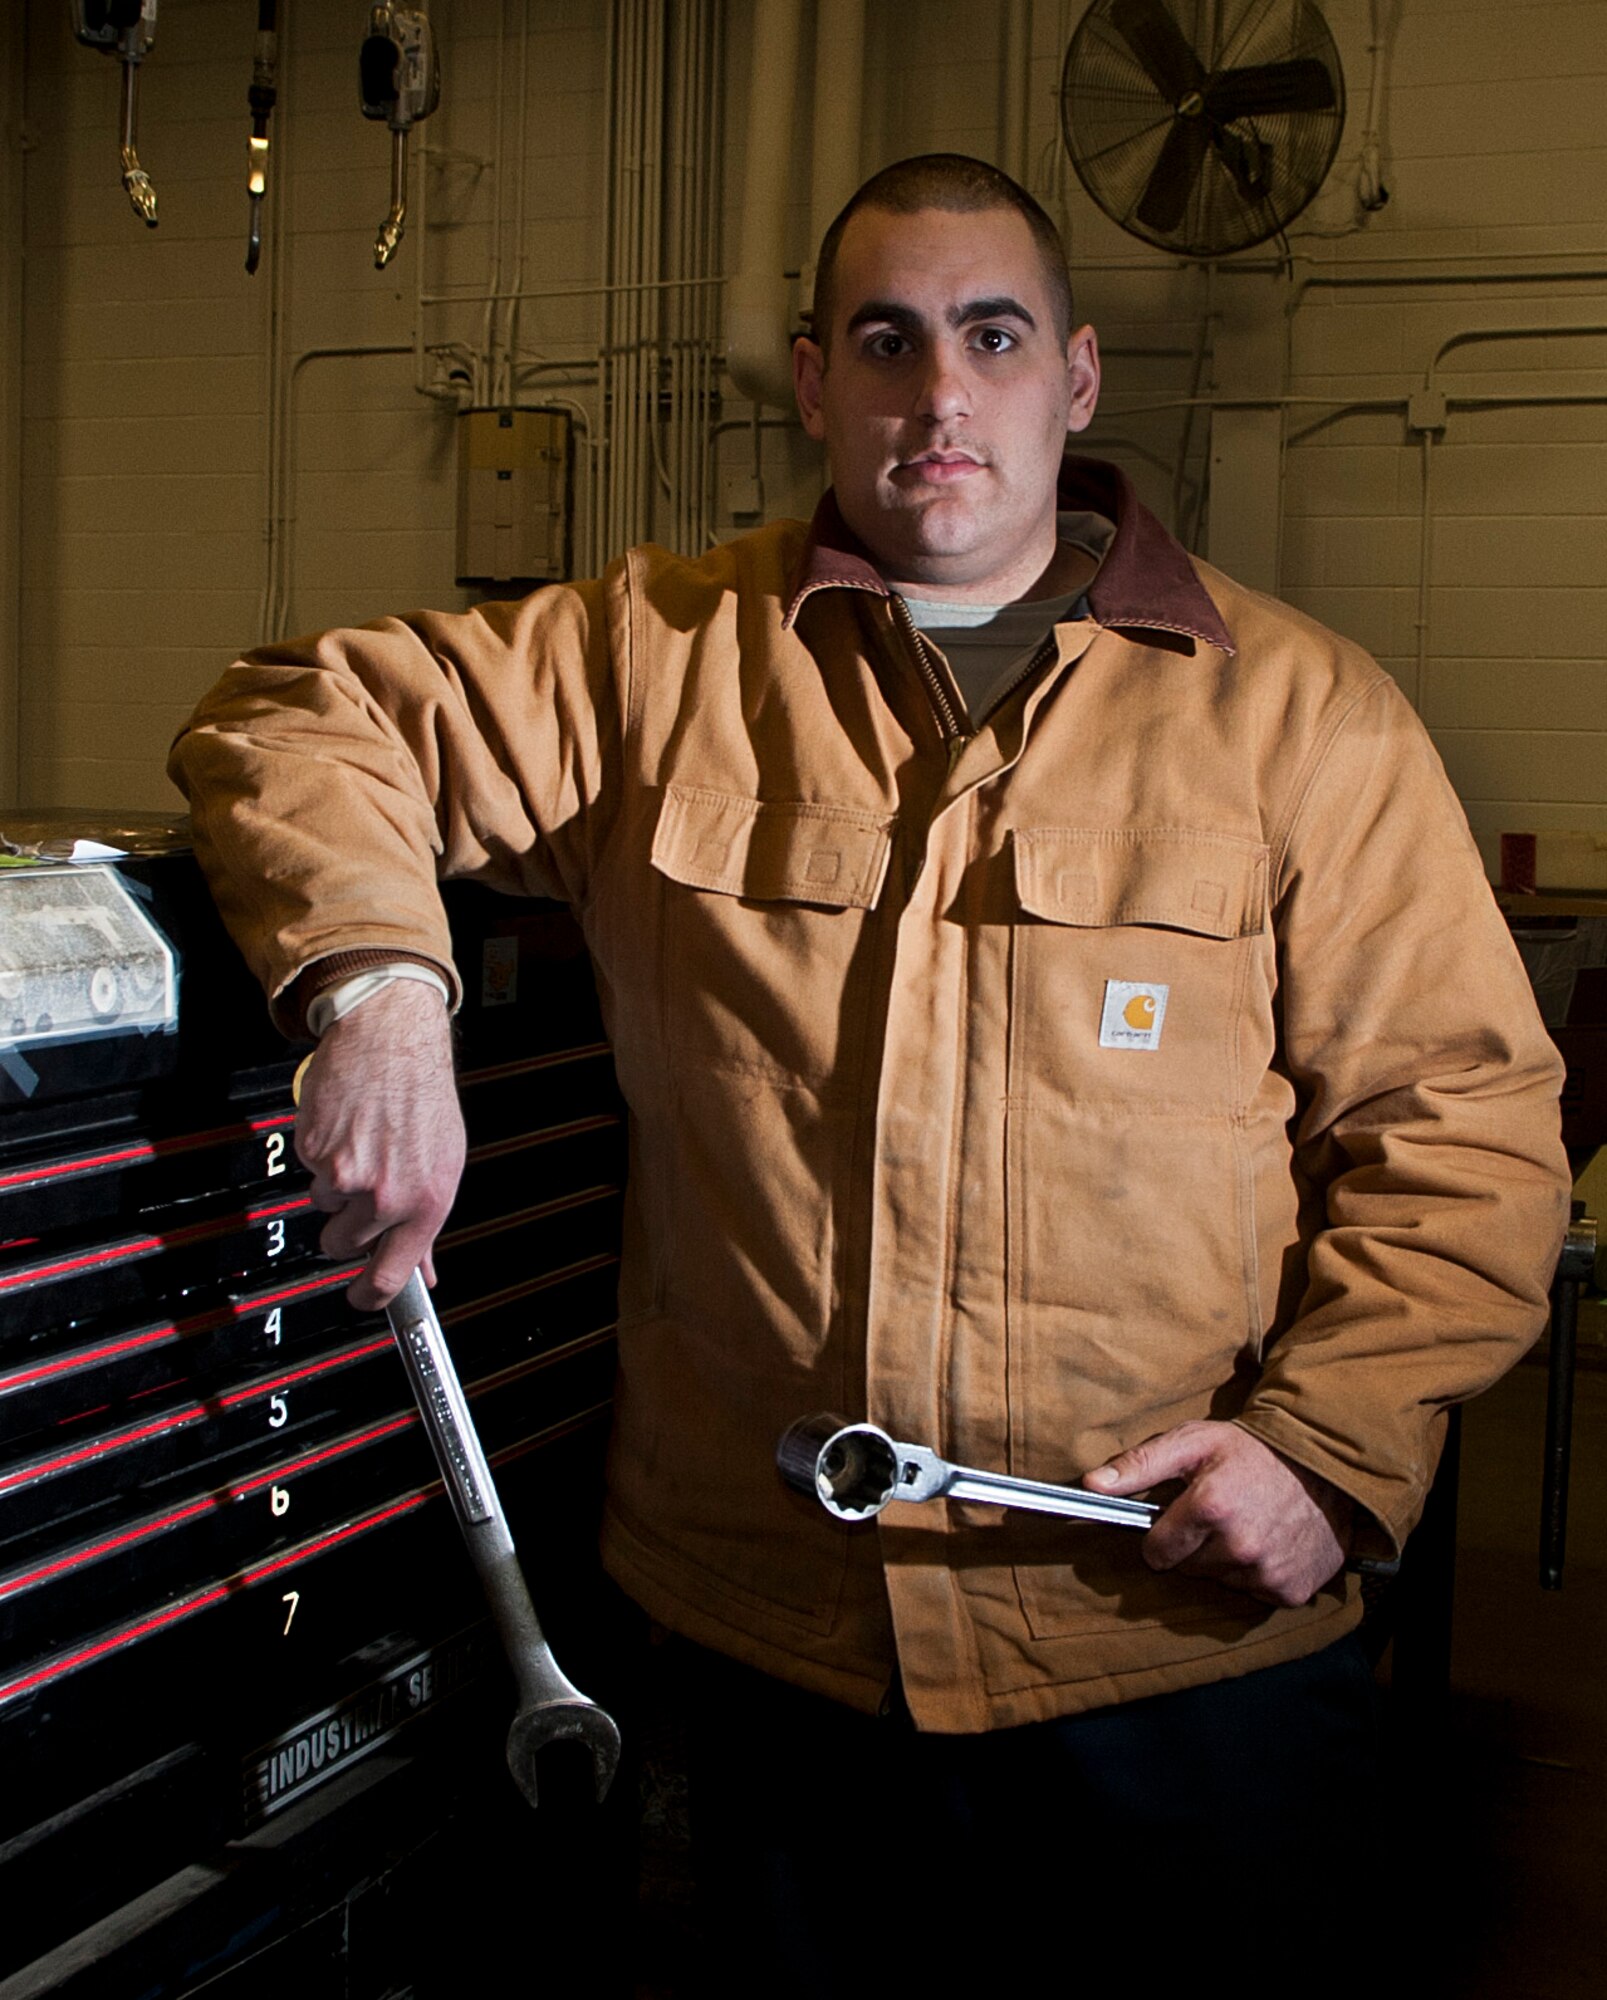 Senior Airman Kevin Sylvia, 5th Logistics Readiness Squadron vehicle maintenance technician, holds maintenance tools at Minot Air Force Base, N.D., Jan. 4, 2017. The 5 LRS special purpose maintainers are trained to perform inspections, repairs and rebuild vehicle components and assemblies. (U.S. Air Force photo/Airman 1st Class Jonathan McElderry)